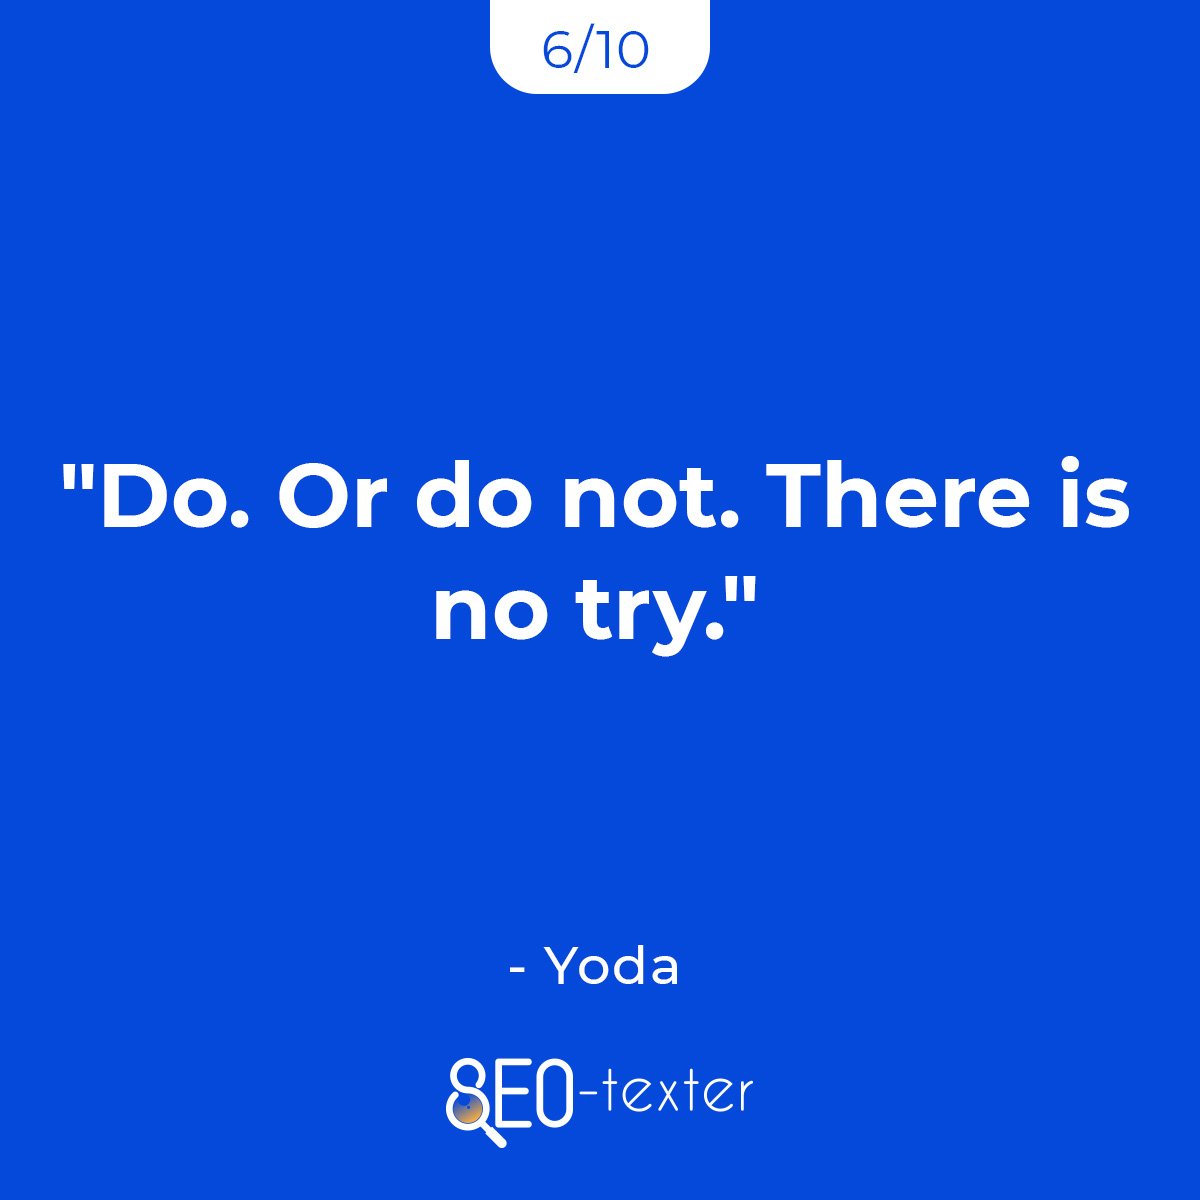 Do. Or do not. There is no try